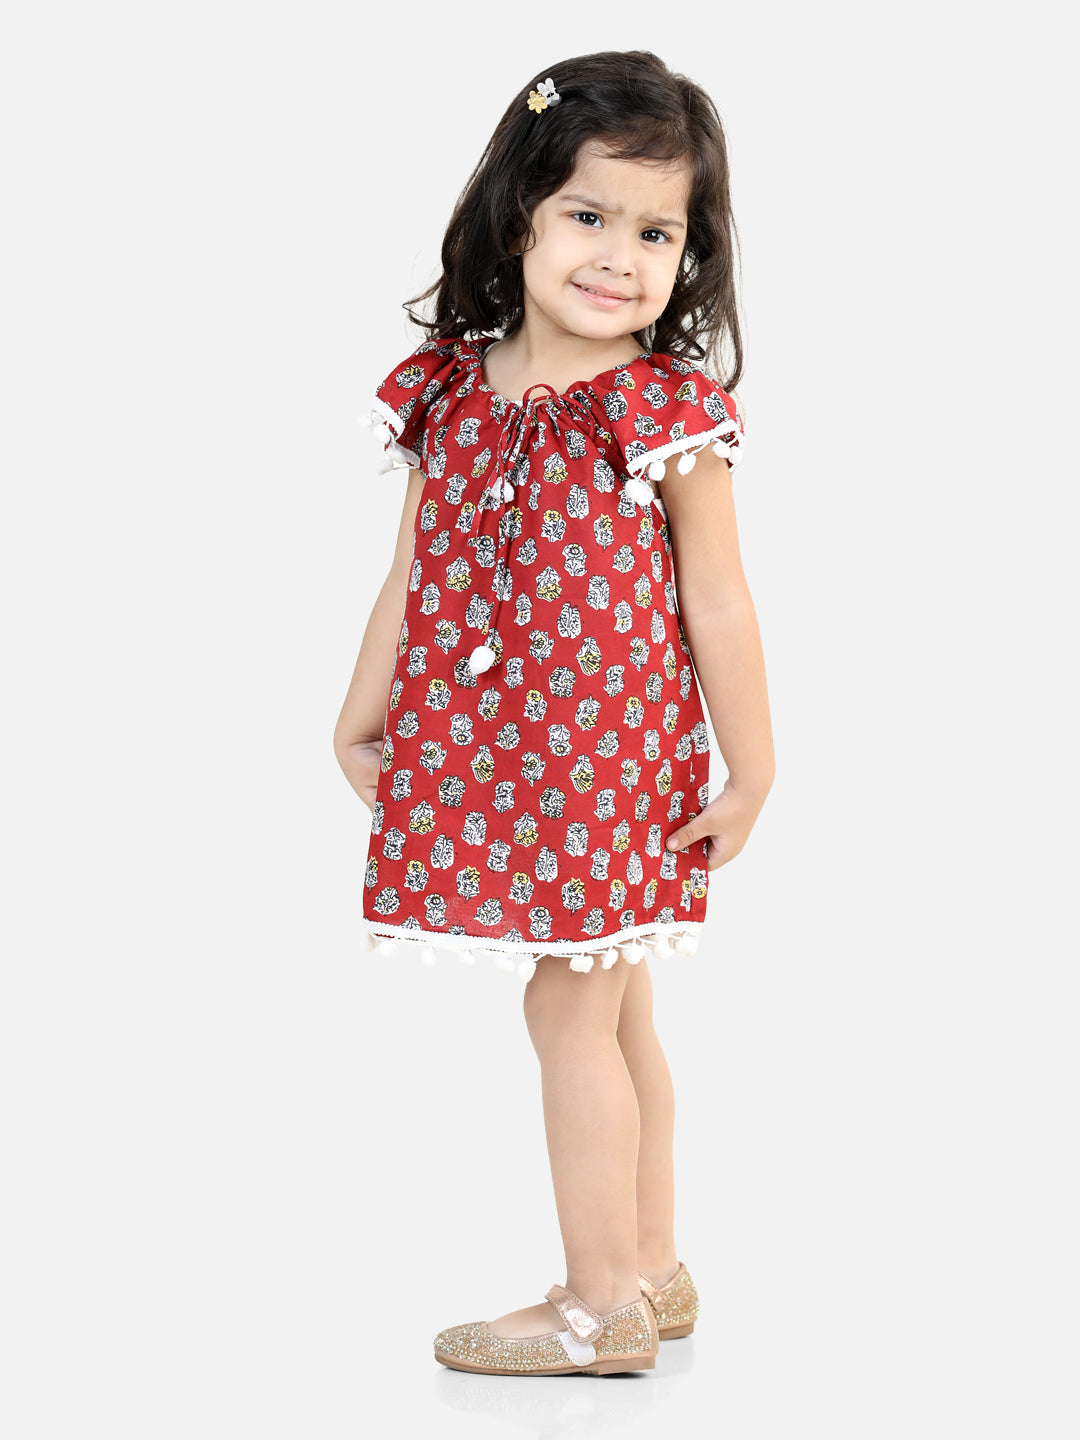 BownBee 100% Cotton Printed with Pompom Jhabla Frock for Girls - Maroon